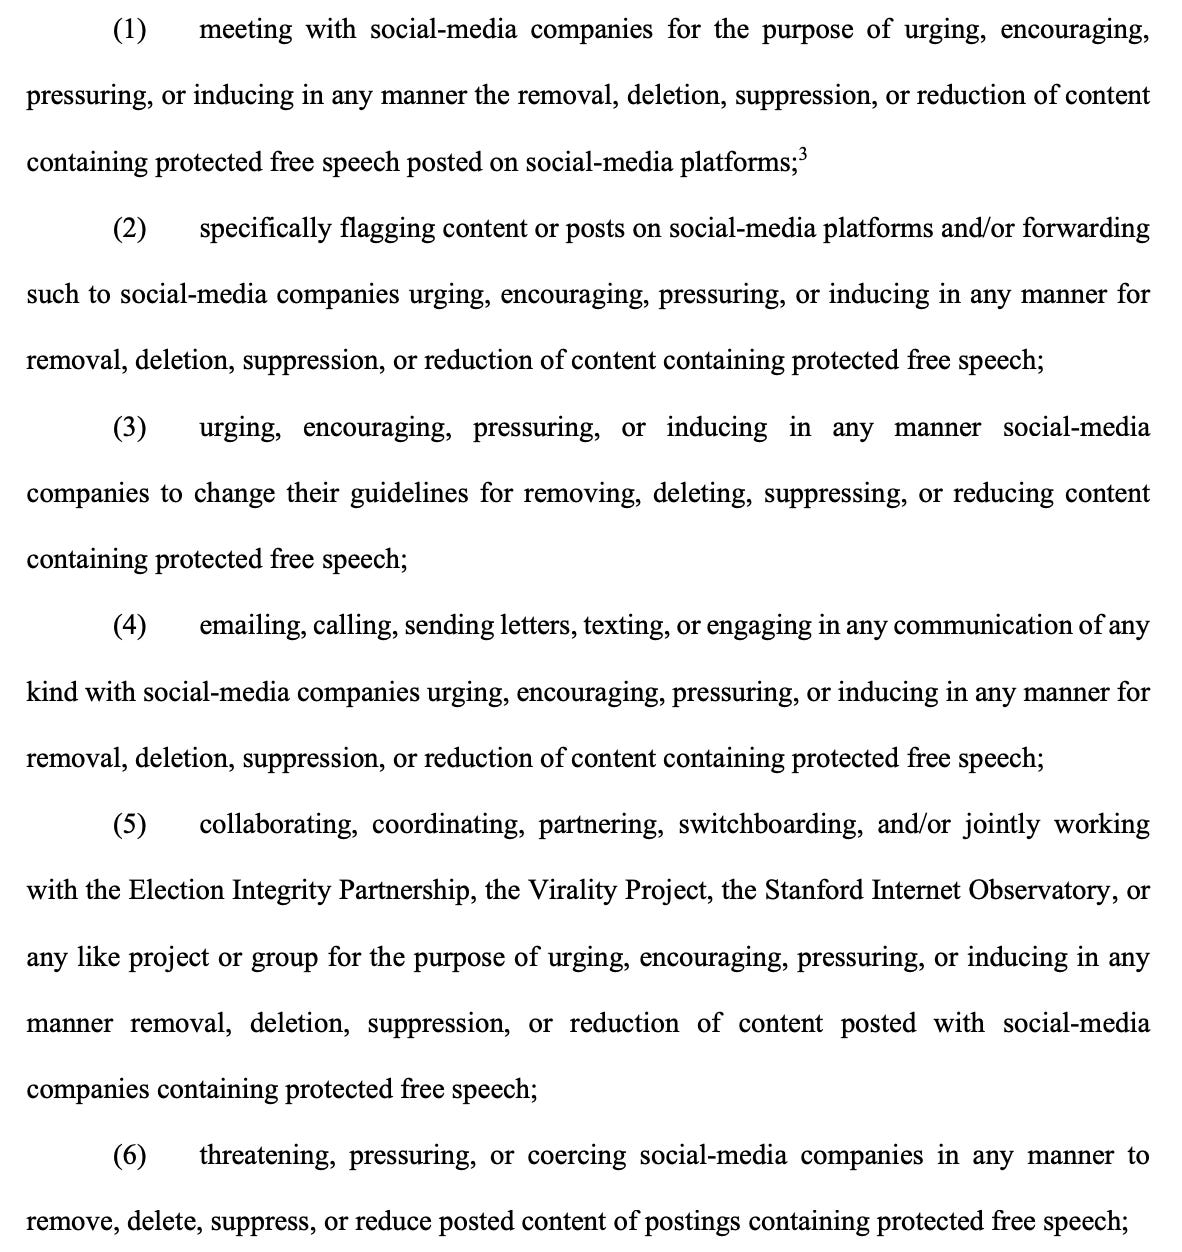 (1) meeting with social-media companies for the purpose of urging, encouraging, pressuring, or inducing in any manner the removal, deletion, suppression, or reduction of content containing protected free speech posted on social-media platforms; 3 (2) specifically flagging content or posts on social-media platforms and/or forwarding such to social-media companies urging, encouraging, pressuring, or inducing in any manner for removal, deletion, suppression, or reduction of content containing protected free speech; (3) urging, encouraging, pressuring, or inducing in any manner social-media companies to change their guidelines for removing, deleting, suppressing, or reducing content containing protected free speech; (4) emailing, calling, sending letters, texting, or engaging in any communication of any kind with social-media companies urging, encouraging, pressuring, or inducing in any manner for removal, deletion, suppression, or reduction of content containing protected free speech; (5) collaborating, coordinating, partnering, switchboarding, and/or jointly working with the Election Integrity Partnership, the Virality Project, the Stanford Internet Observatory, or any like project or group for the purpose of urging, encouraging, pressuring, or inducing in any manner removal, deletion, suppression, or reduction of content posted with social-media companies containing protected free speech; (6) threatening, pressuring, or coercing social-media companies in any manner to remove, delete, suppress, or reduce posted content of postings containing protected free speech;